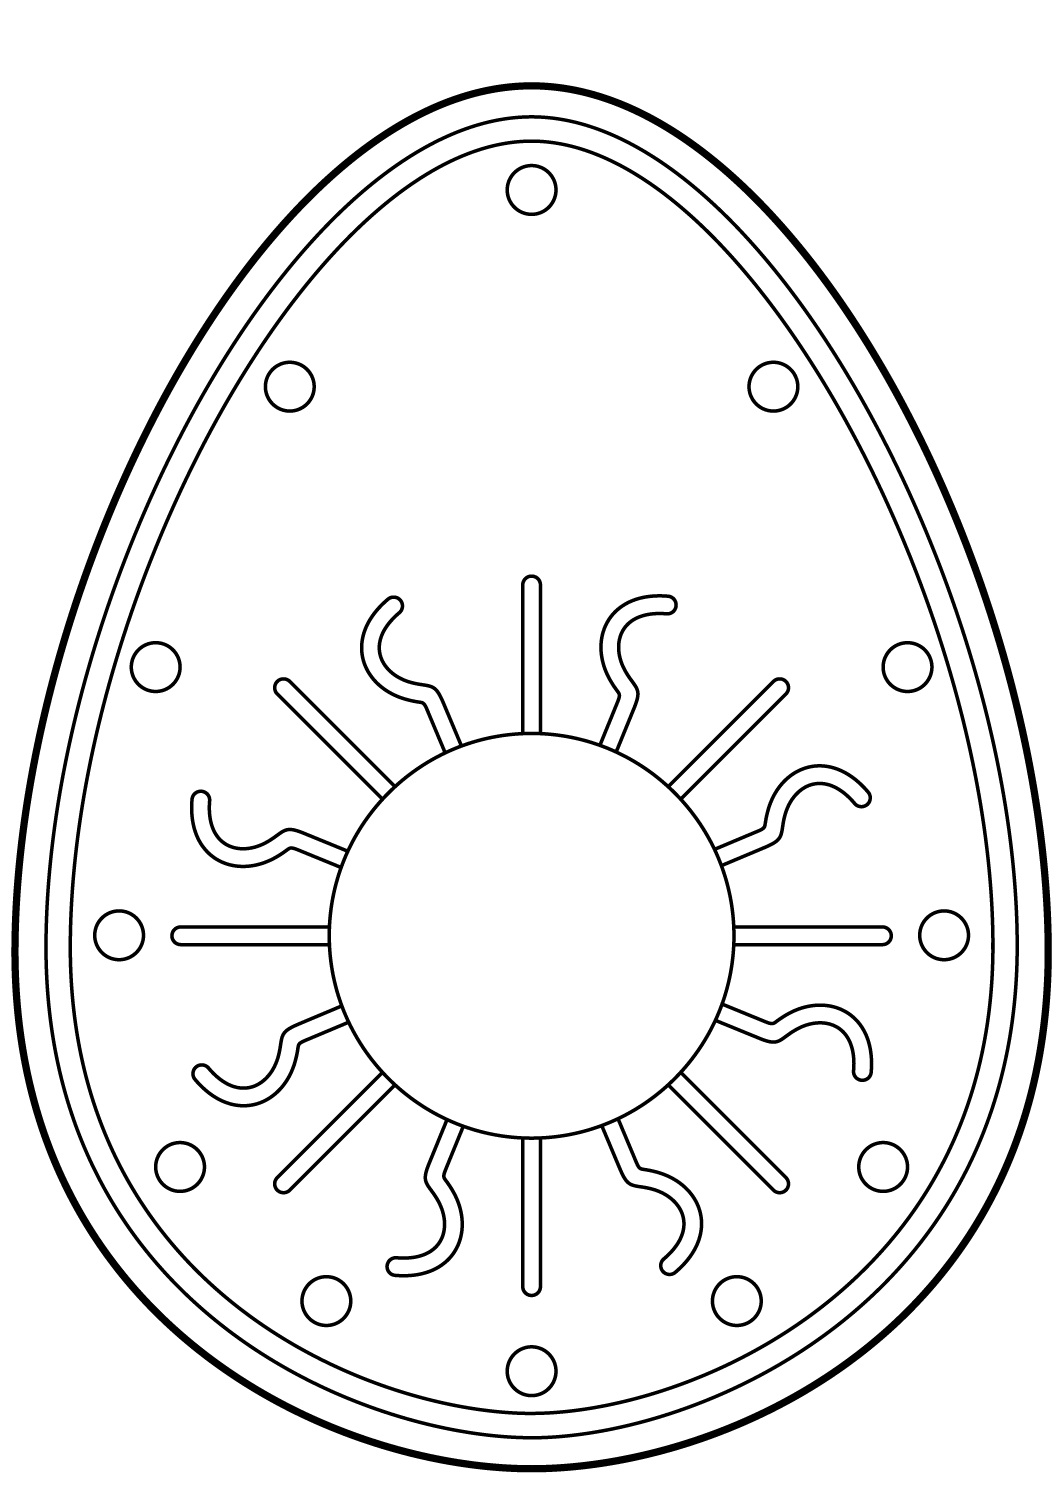 Easter Egg with Sun Pattern Coloring Page